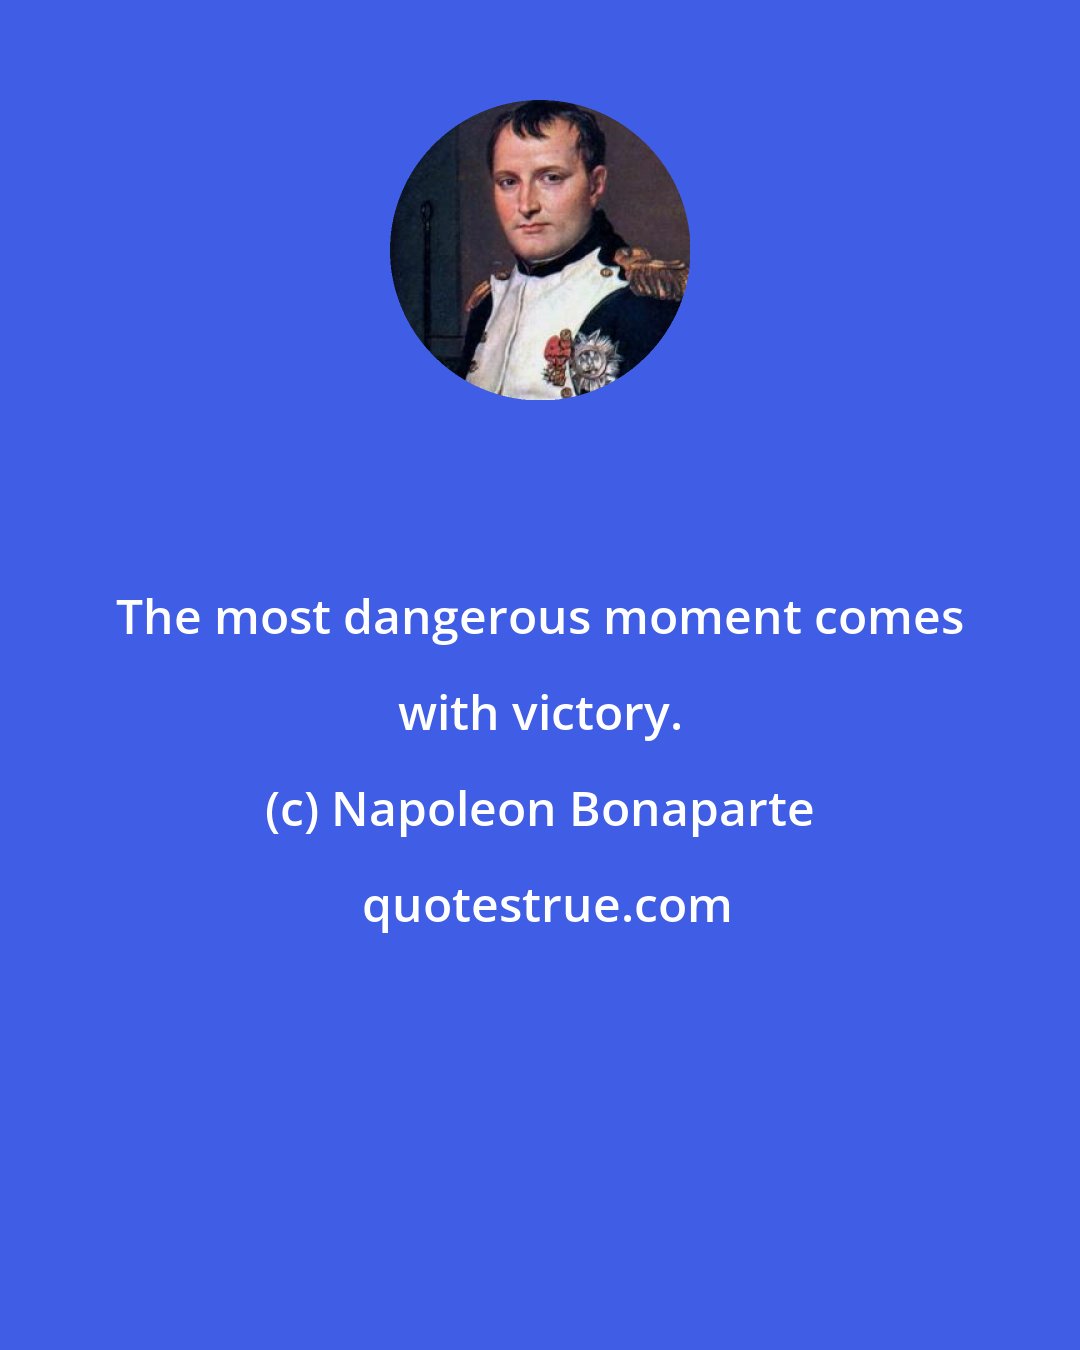 Napoleon Bonaparte: The most dangerous moment comes with victory.